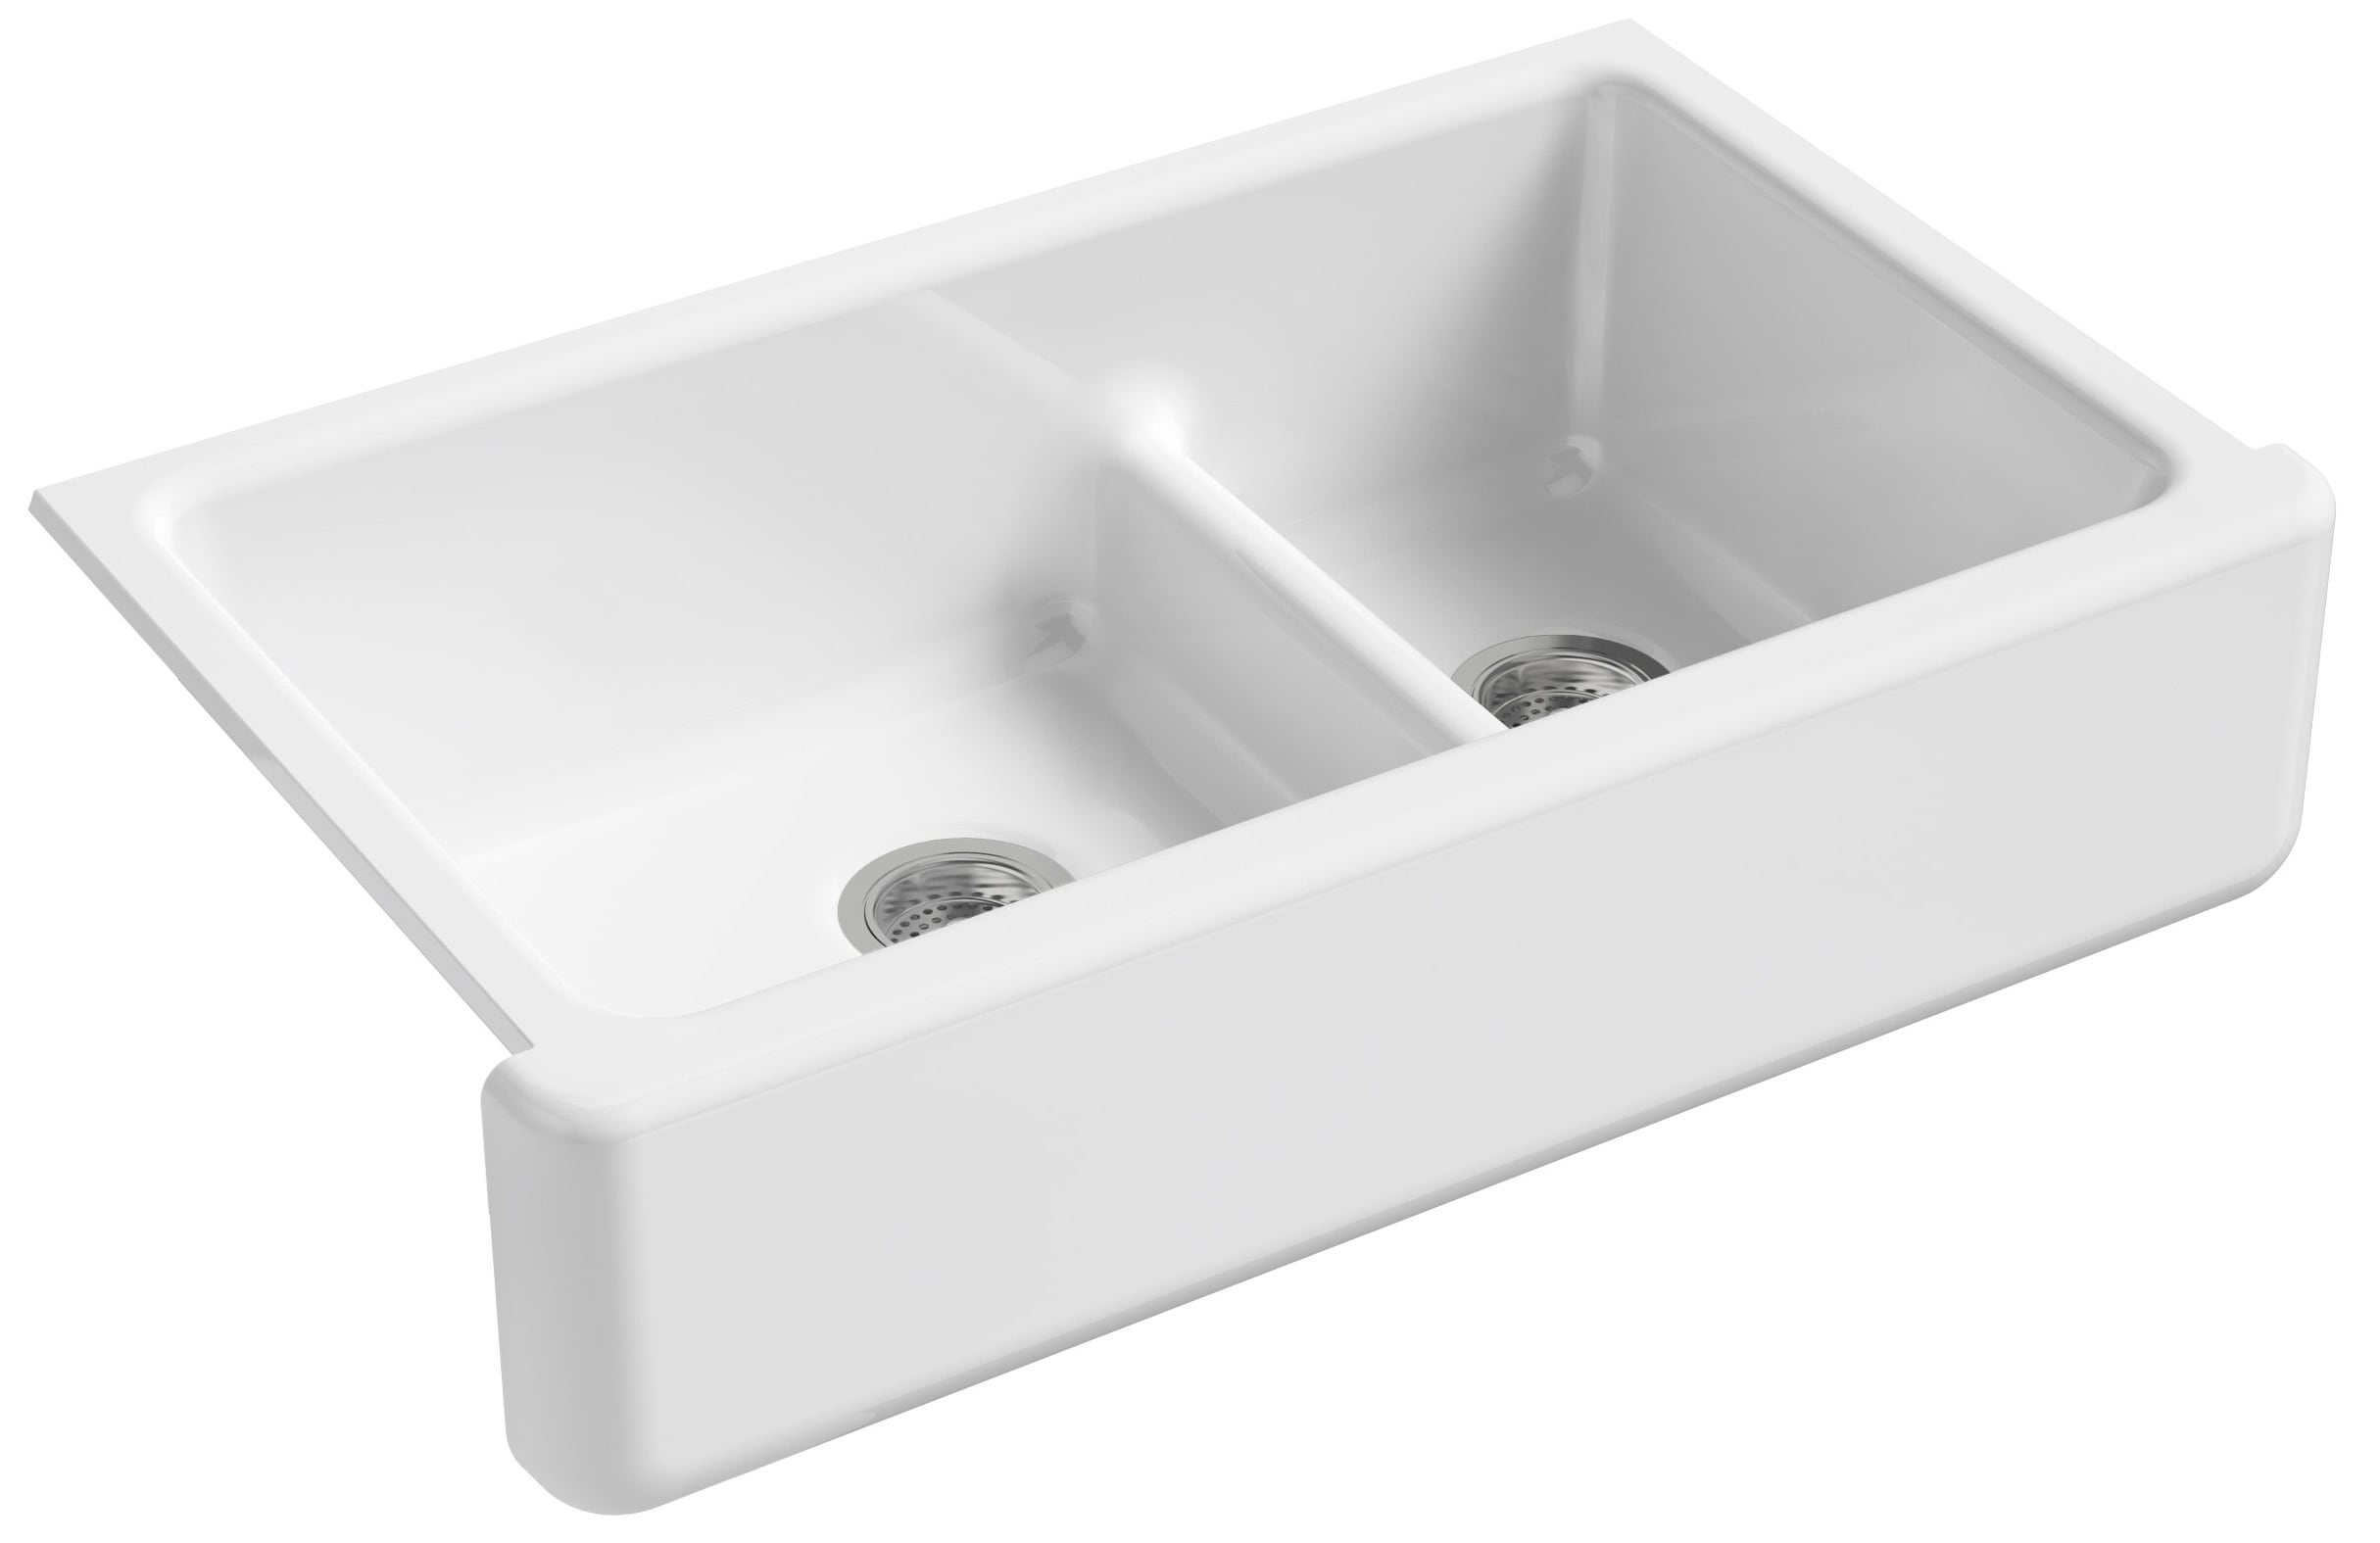 Plastic Sink Insert Collapsible Small Size White 13 x 22